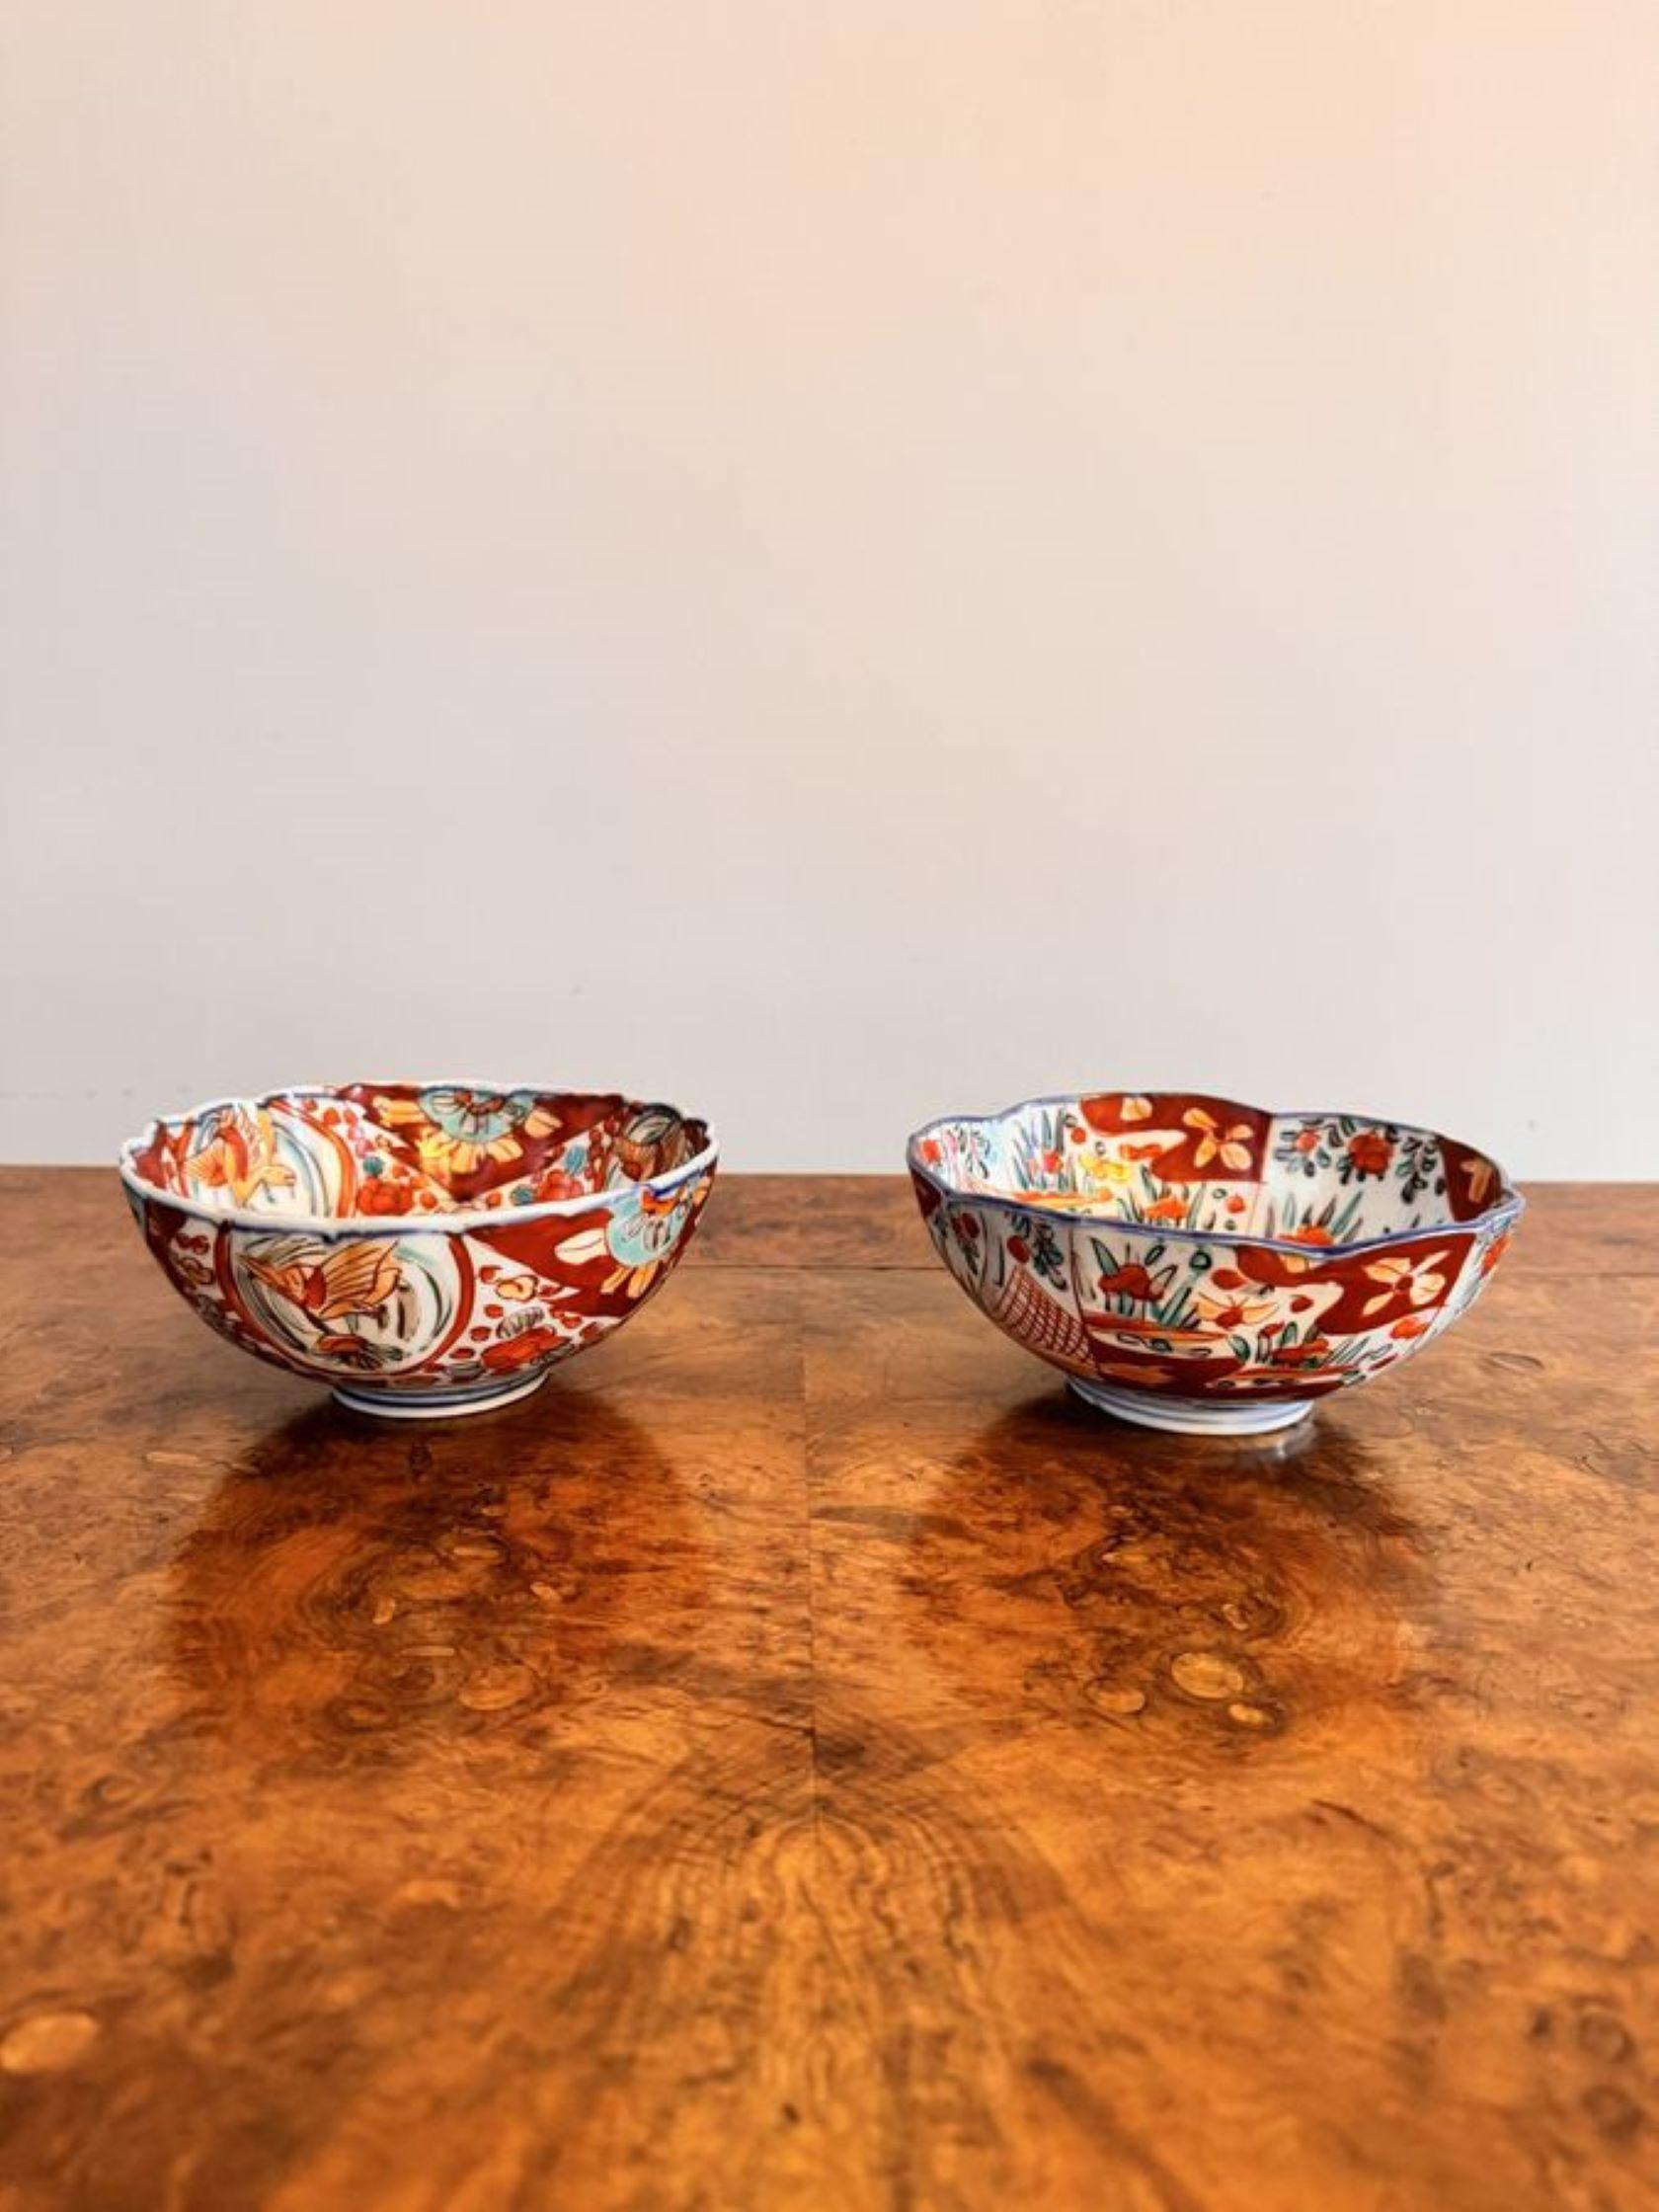 Quality collection of five antique Japanese imari bowls having five antique Japanese imari bowls all with lovely individual patterns decorated with flowers, trees, leaves, birds, fish and scrolls hand painted in wonderful red, blue, green, and white